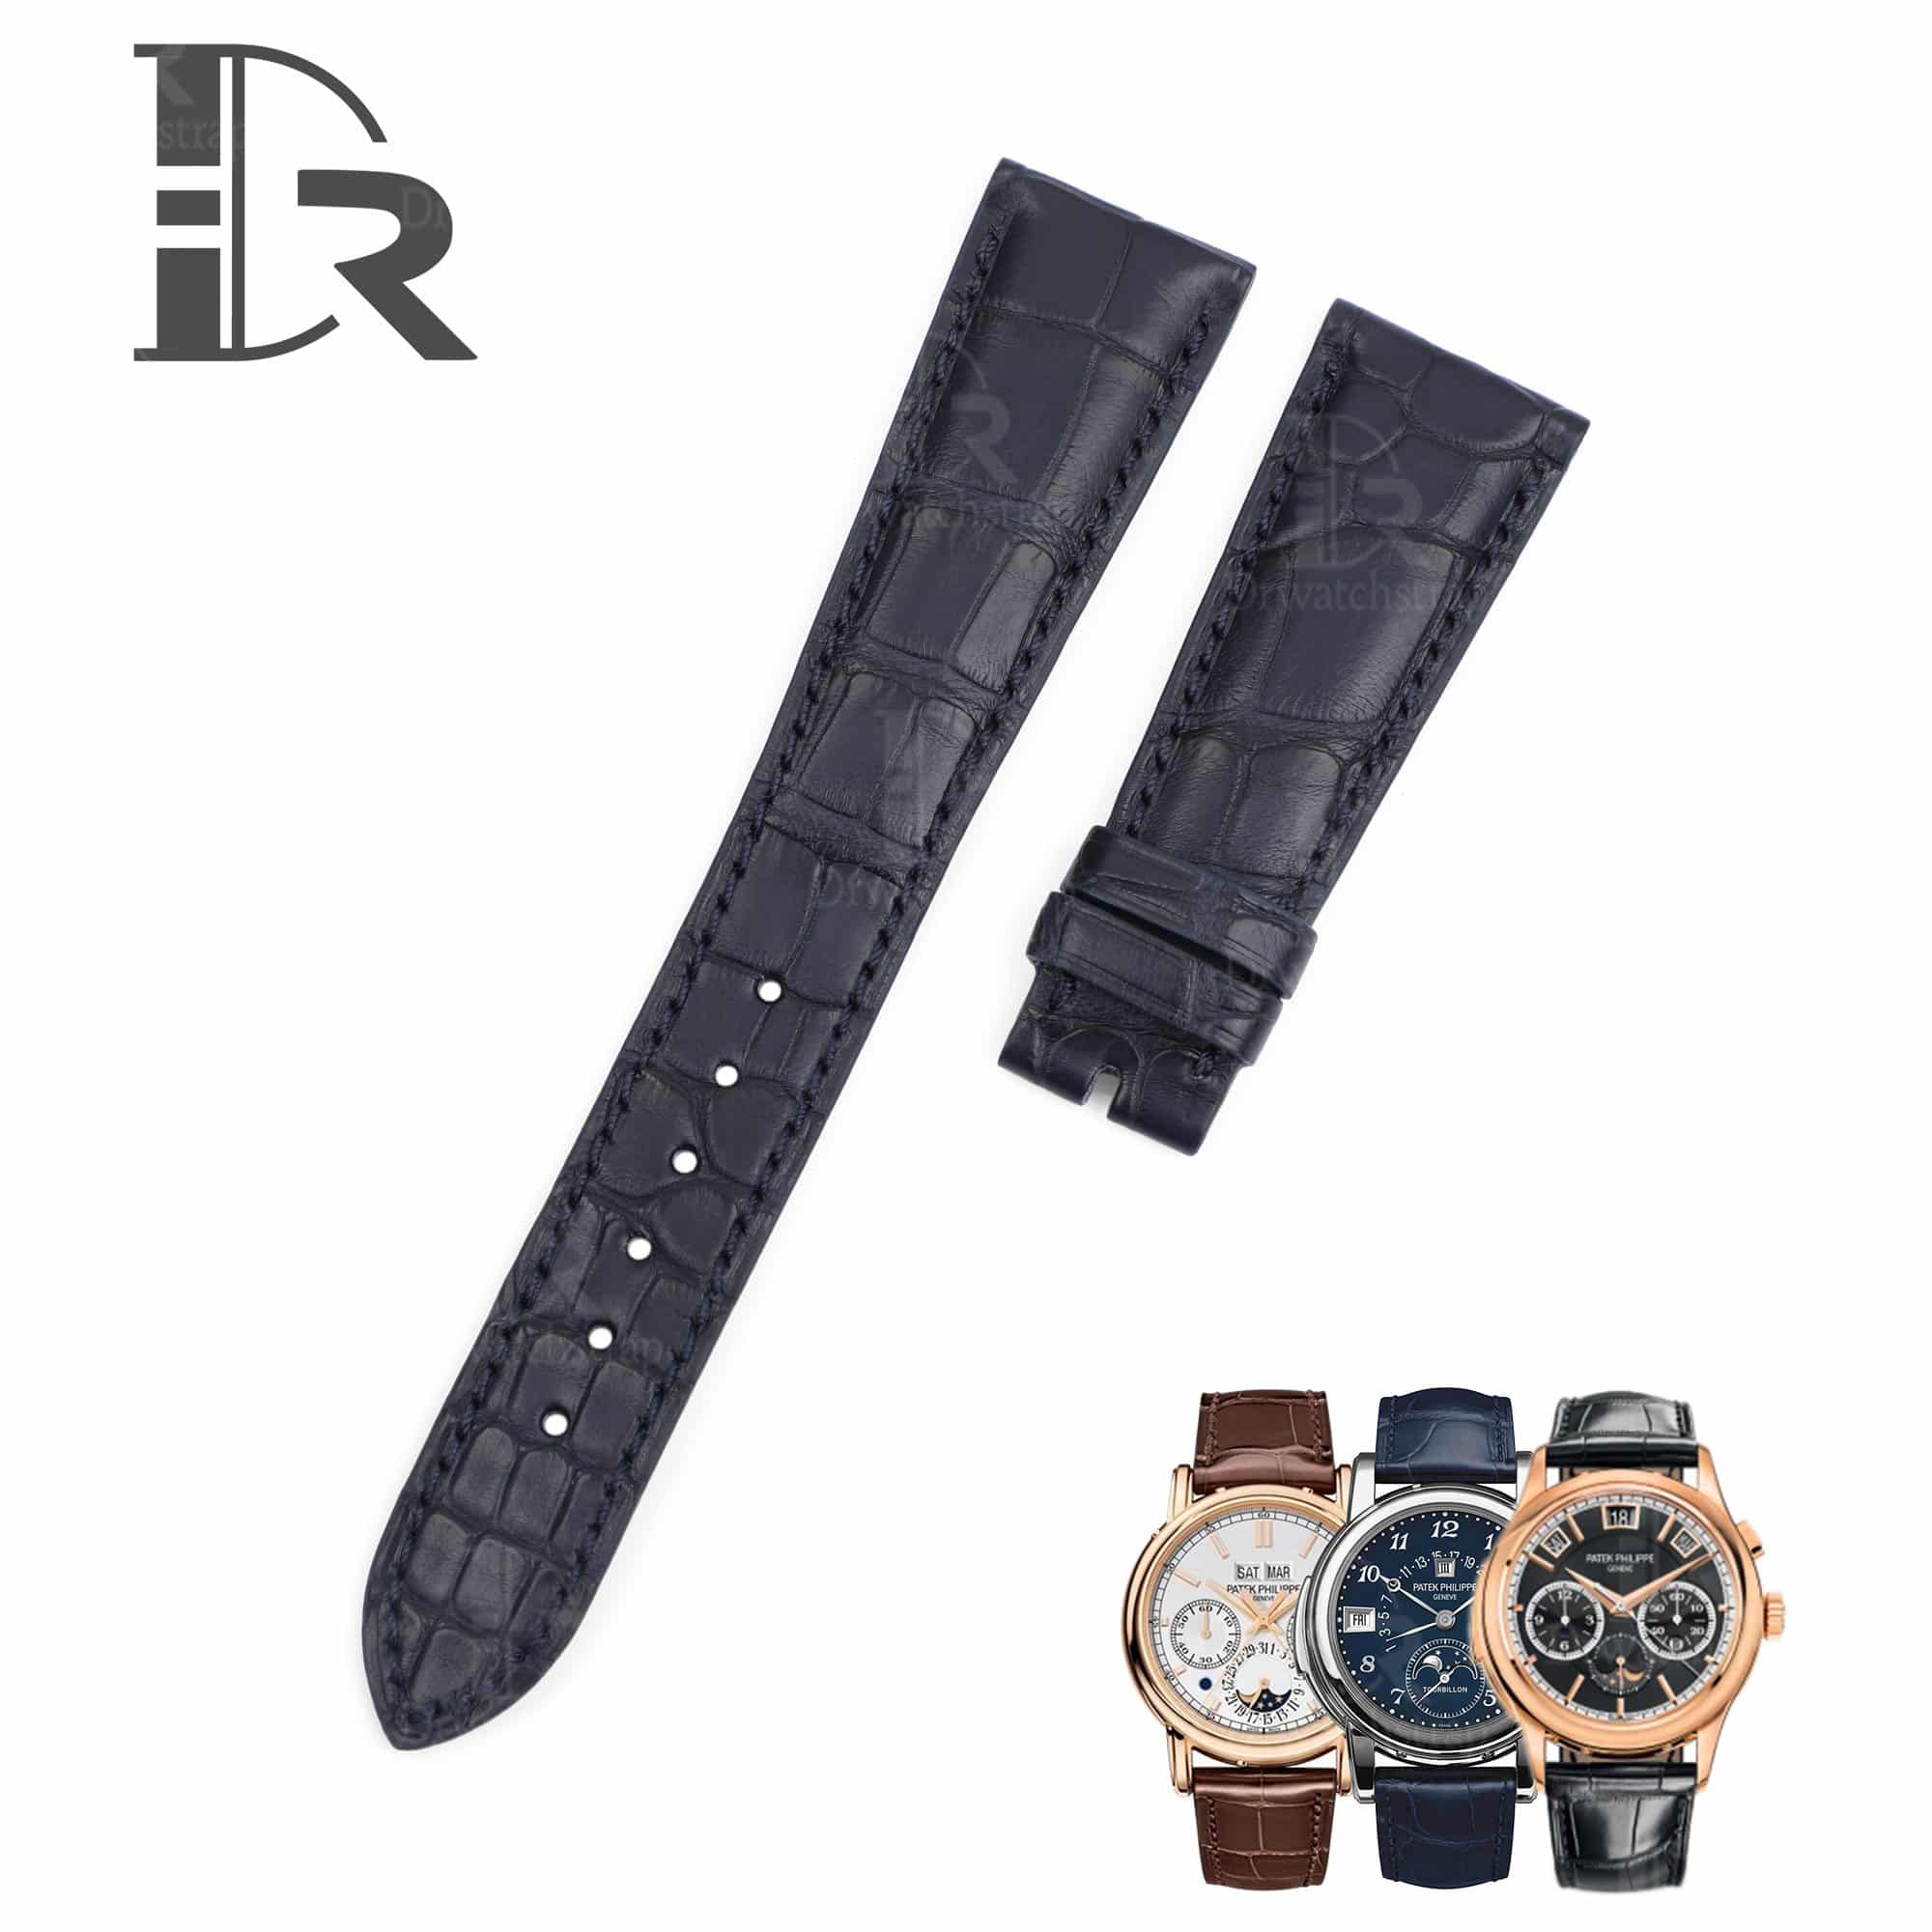 Buy replacement Patek Philippe Blue leather strap American Alligator at discount price lug size available 12mm 14mm 16mm 18mm 19mm 20mm 21mm 22mm 23mm 24mm